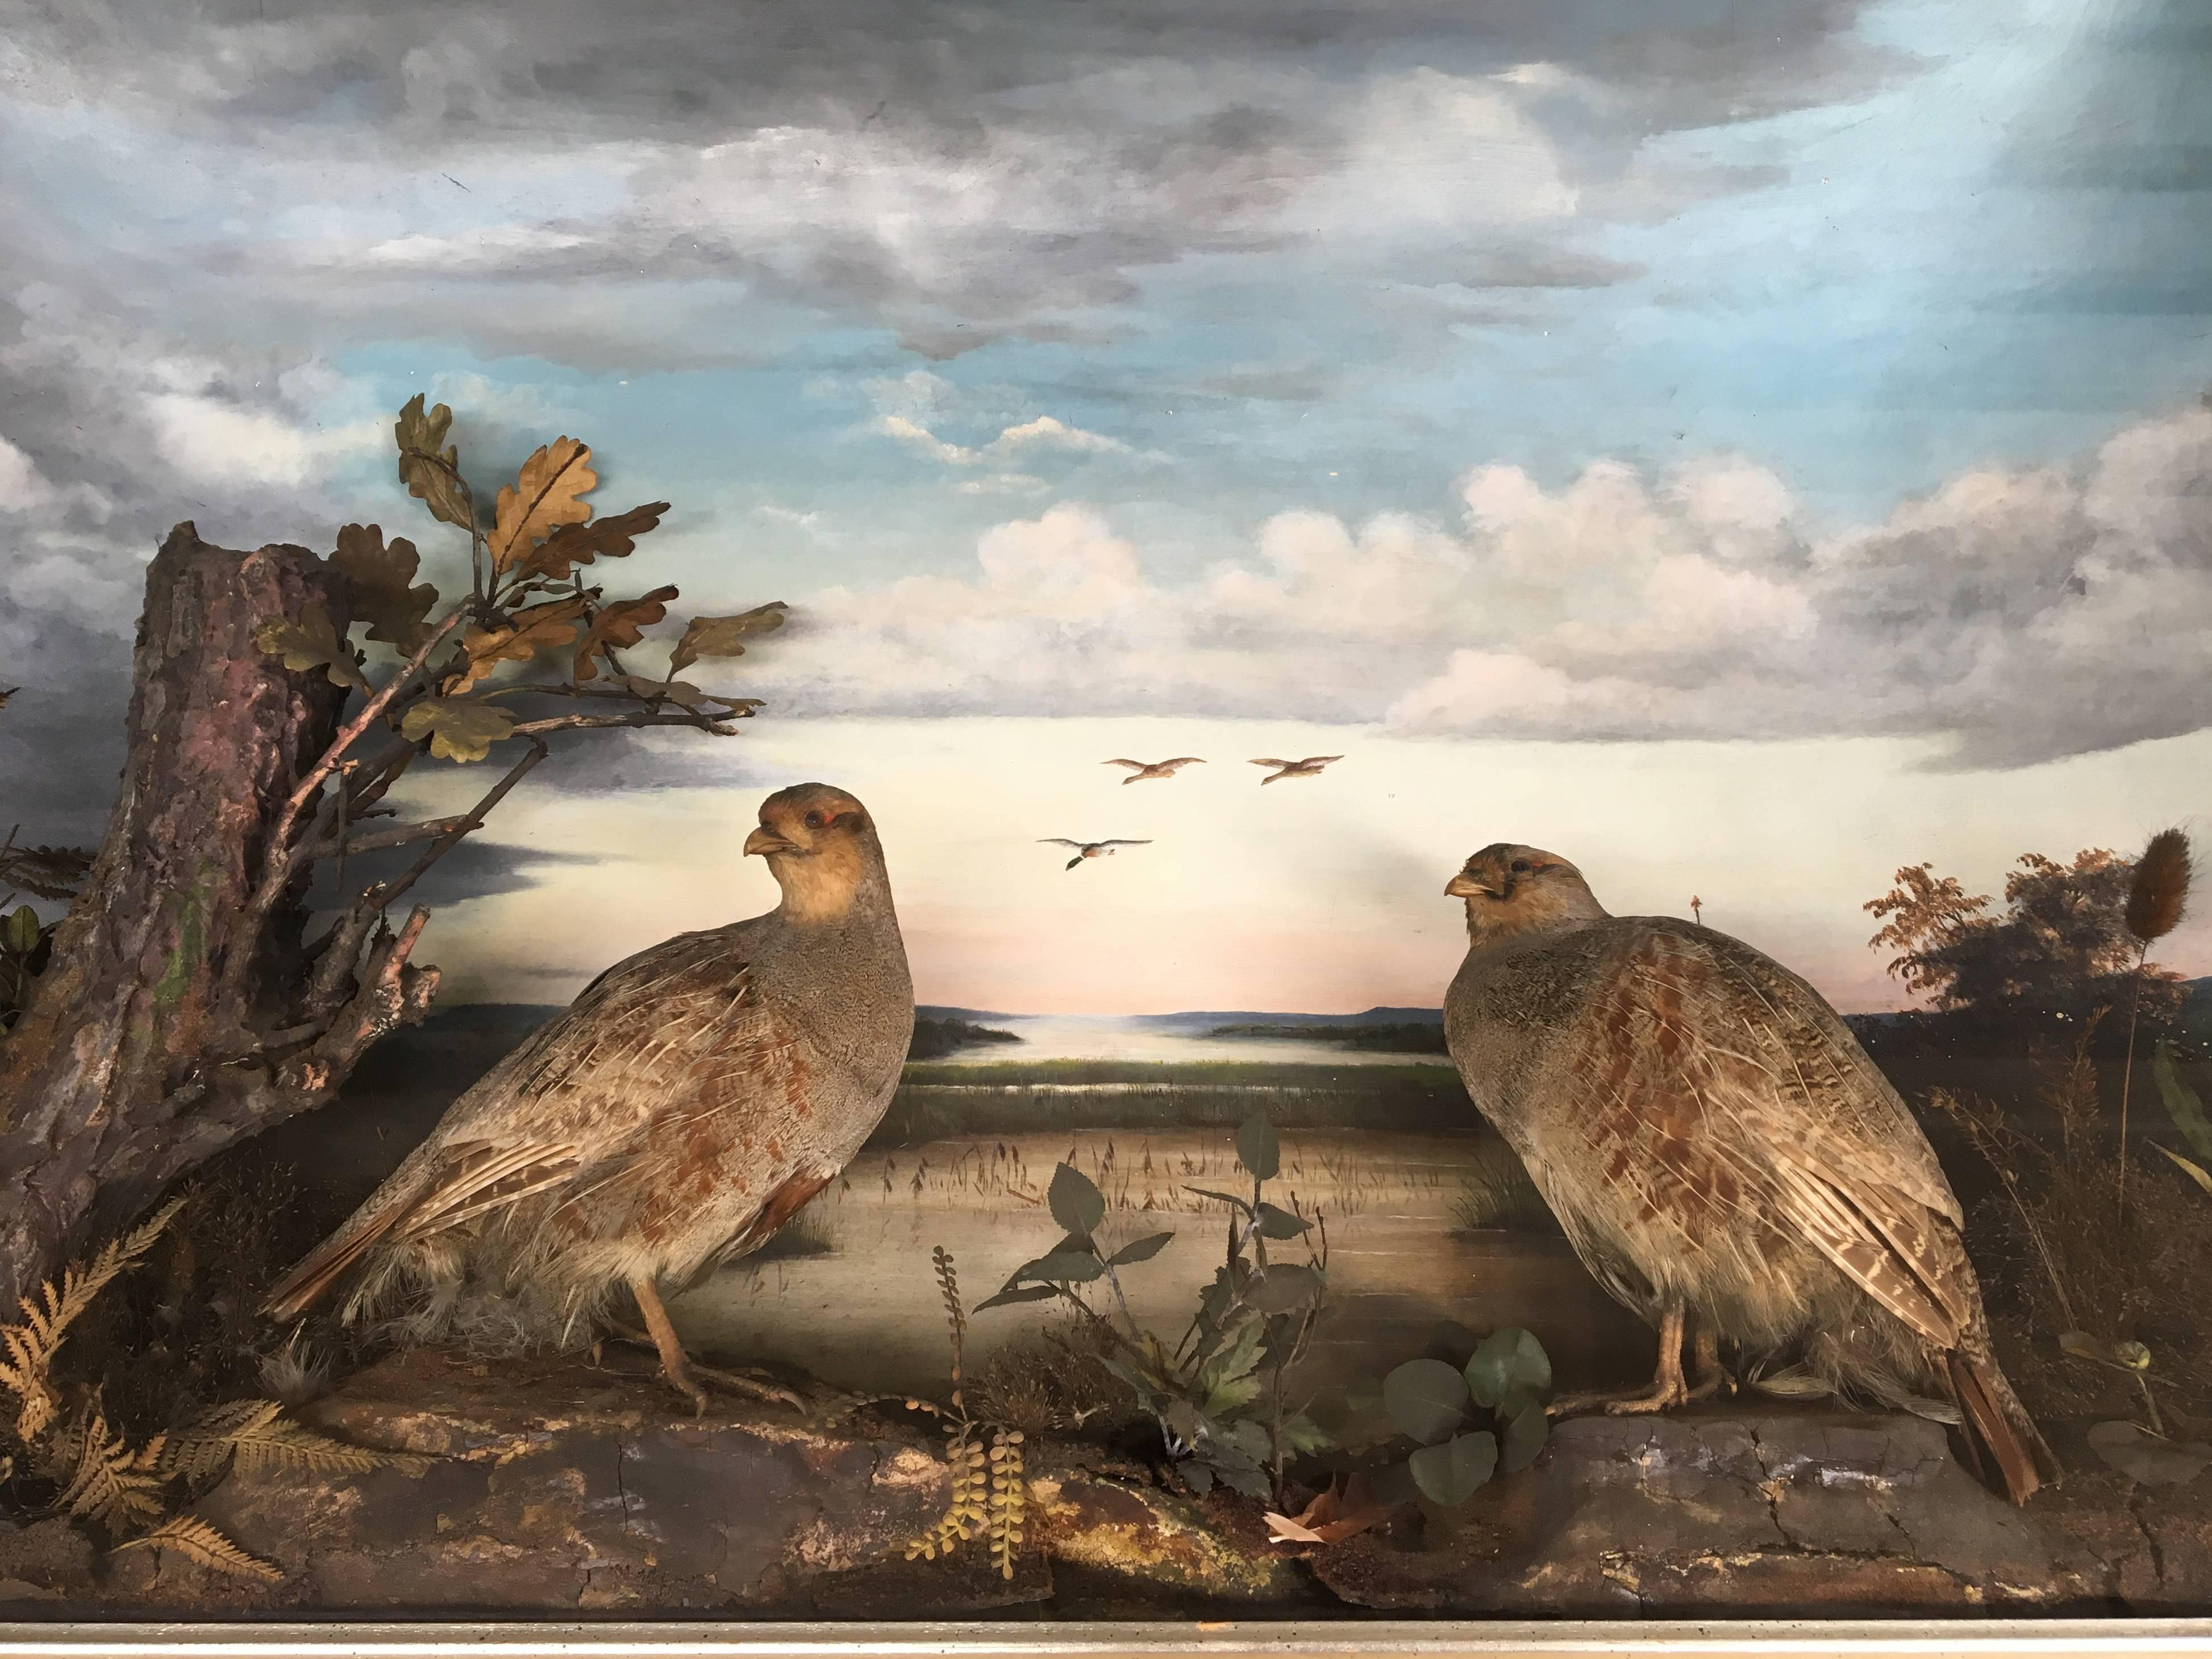 This 19th century diorama contains a beautiful oil painting in the background and two beautiful taxidermied grey partridges in the foreground. The diorama is surrounded by a gilt shadowbox frame.